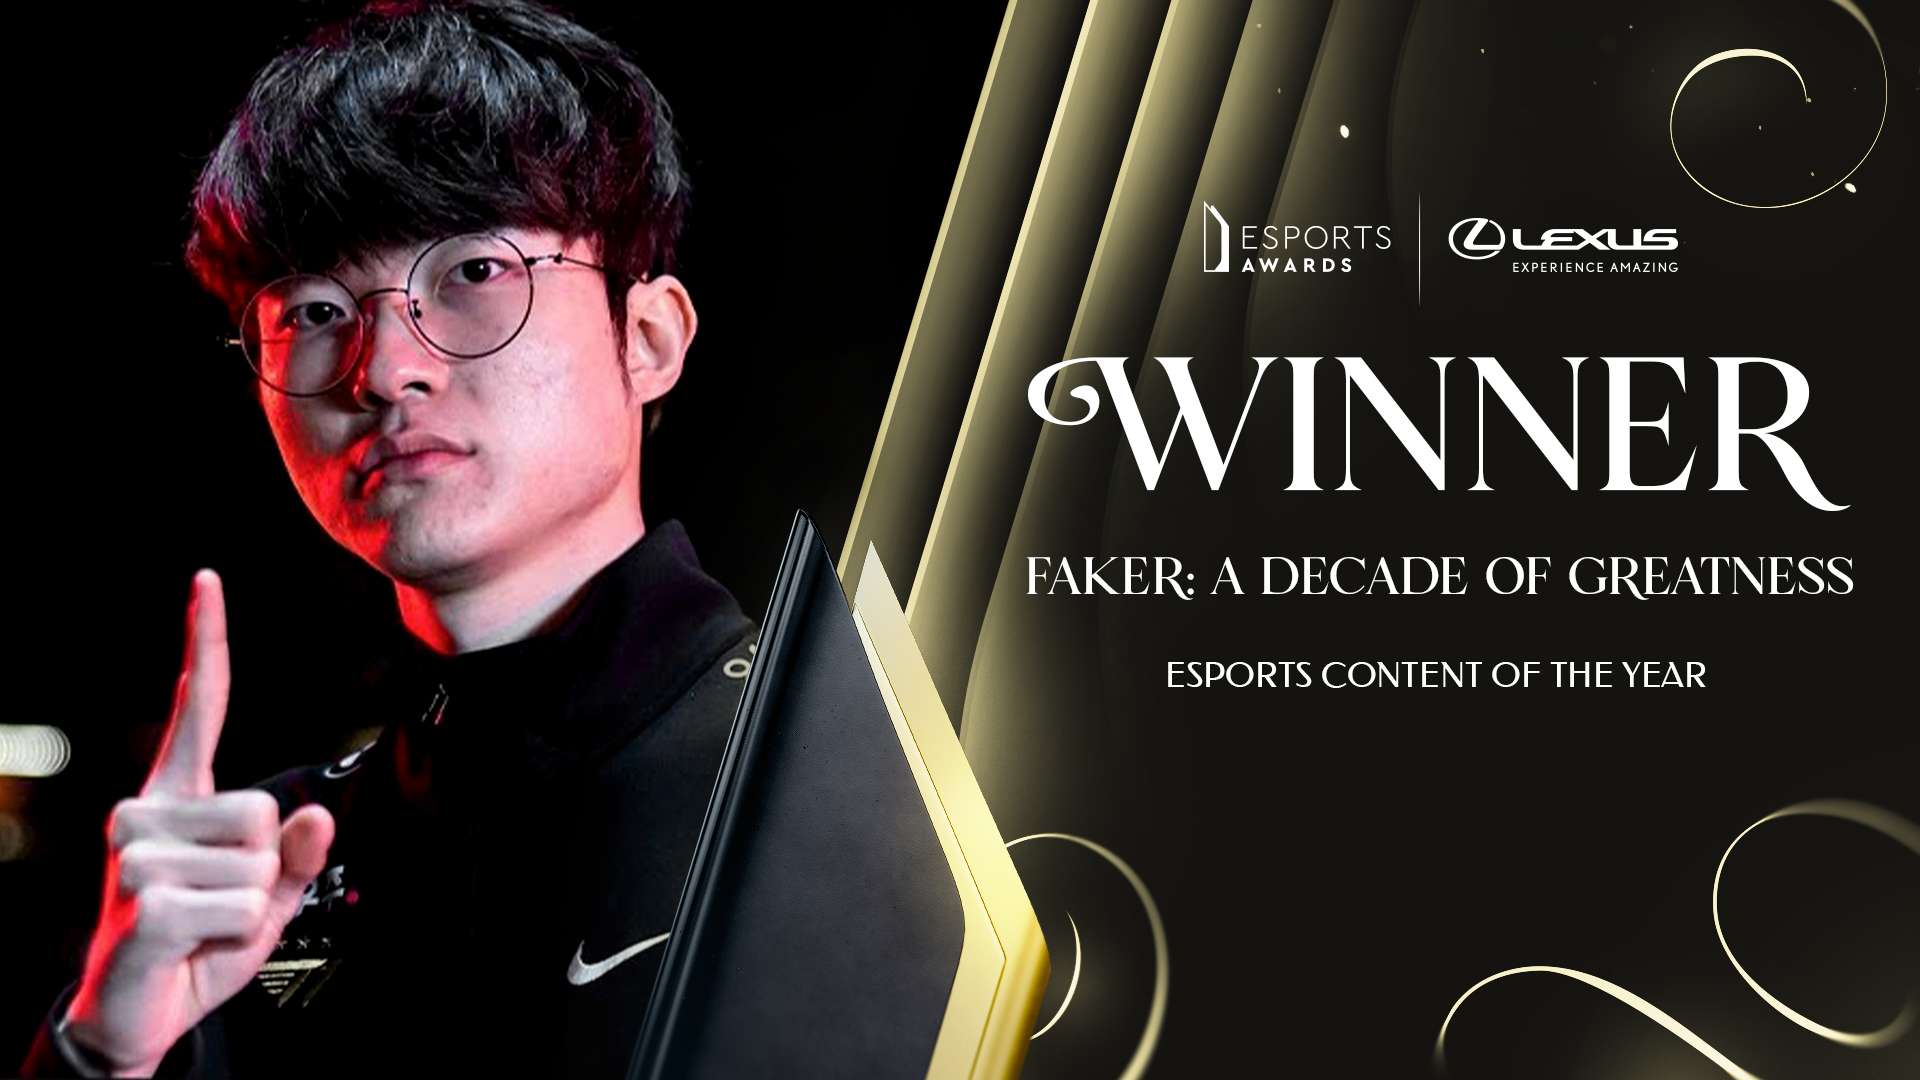 Faker giành giải Esports Content of the Year.